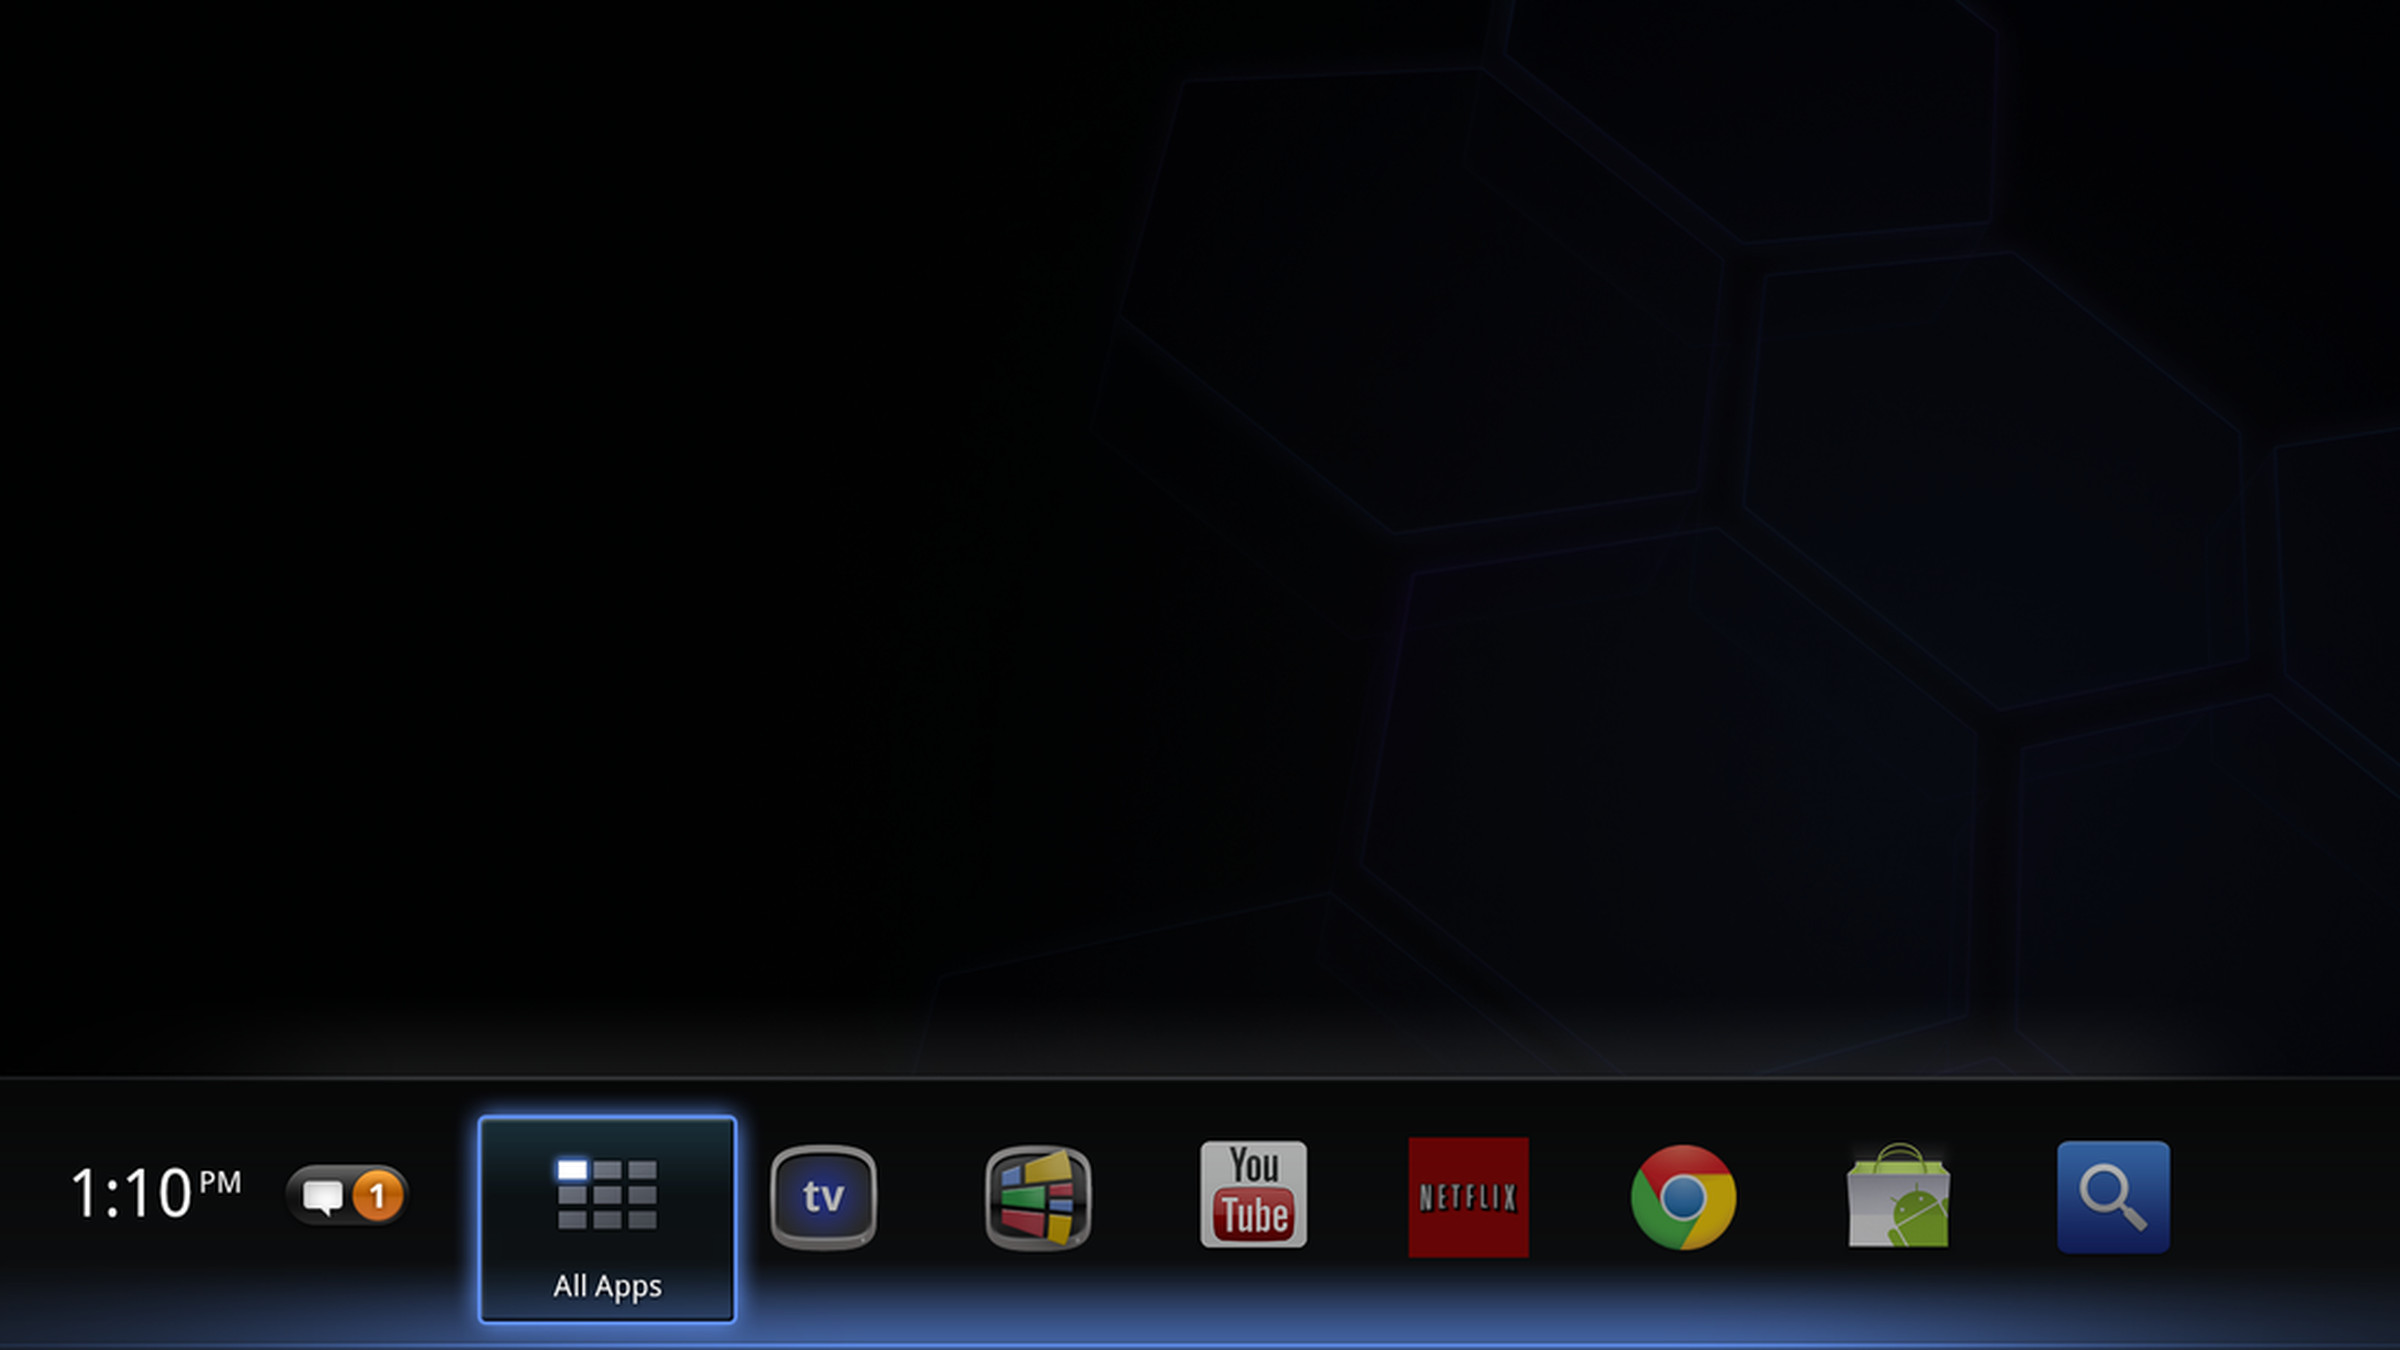 Google TV updated to Android 3.1